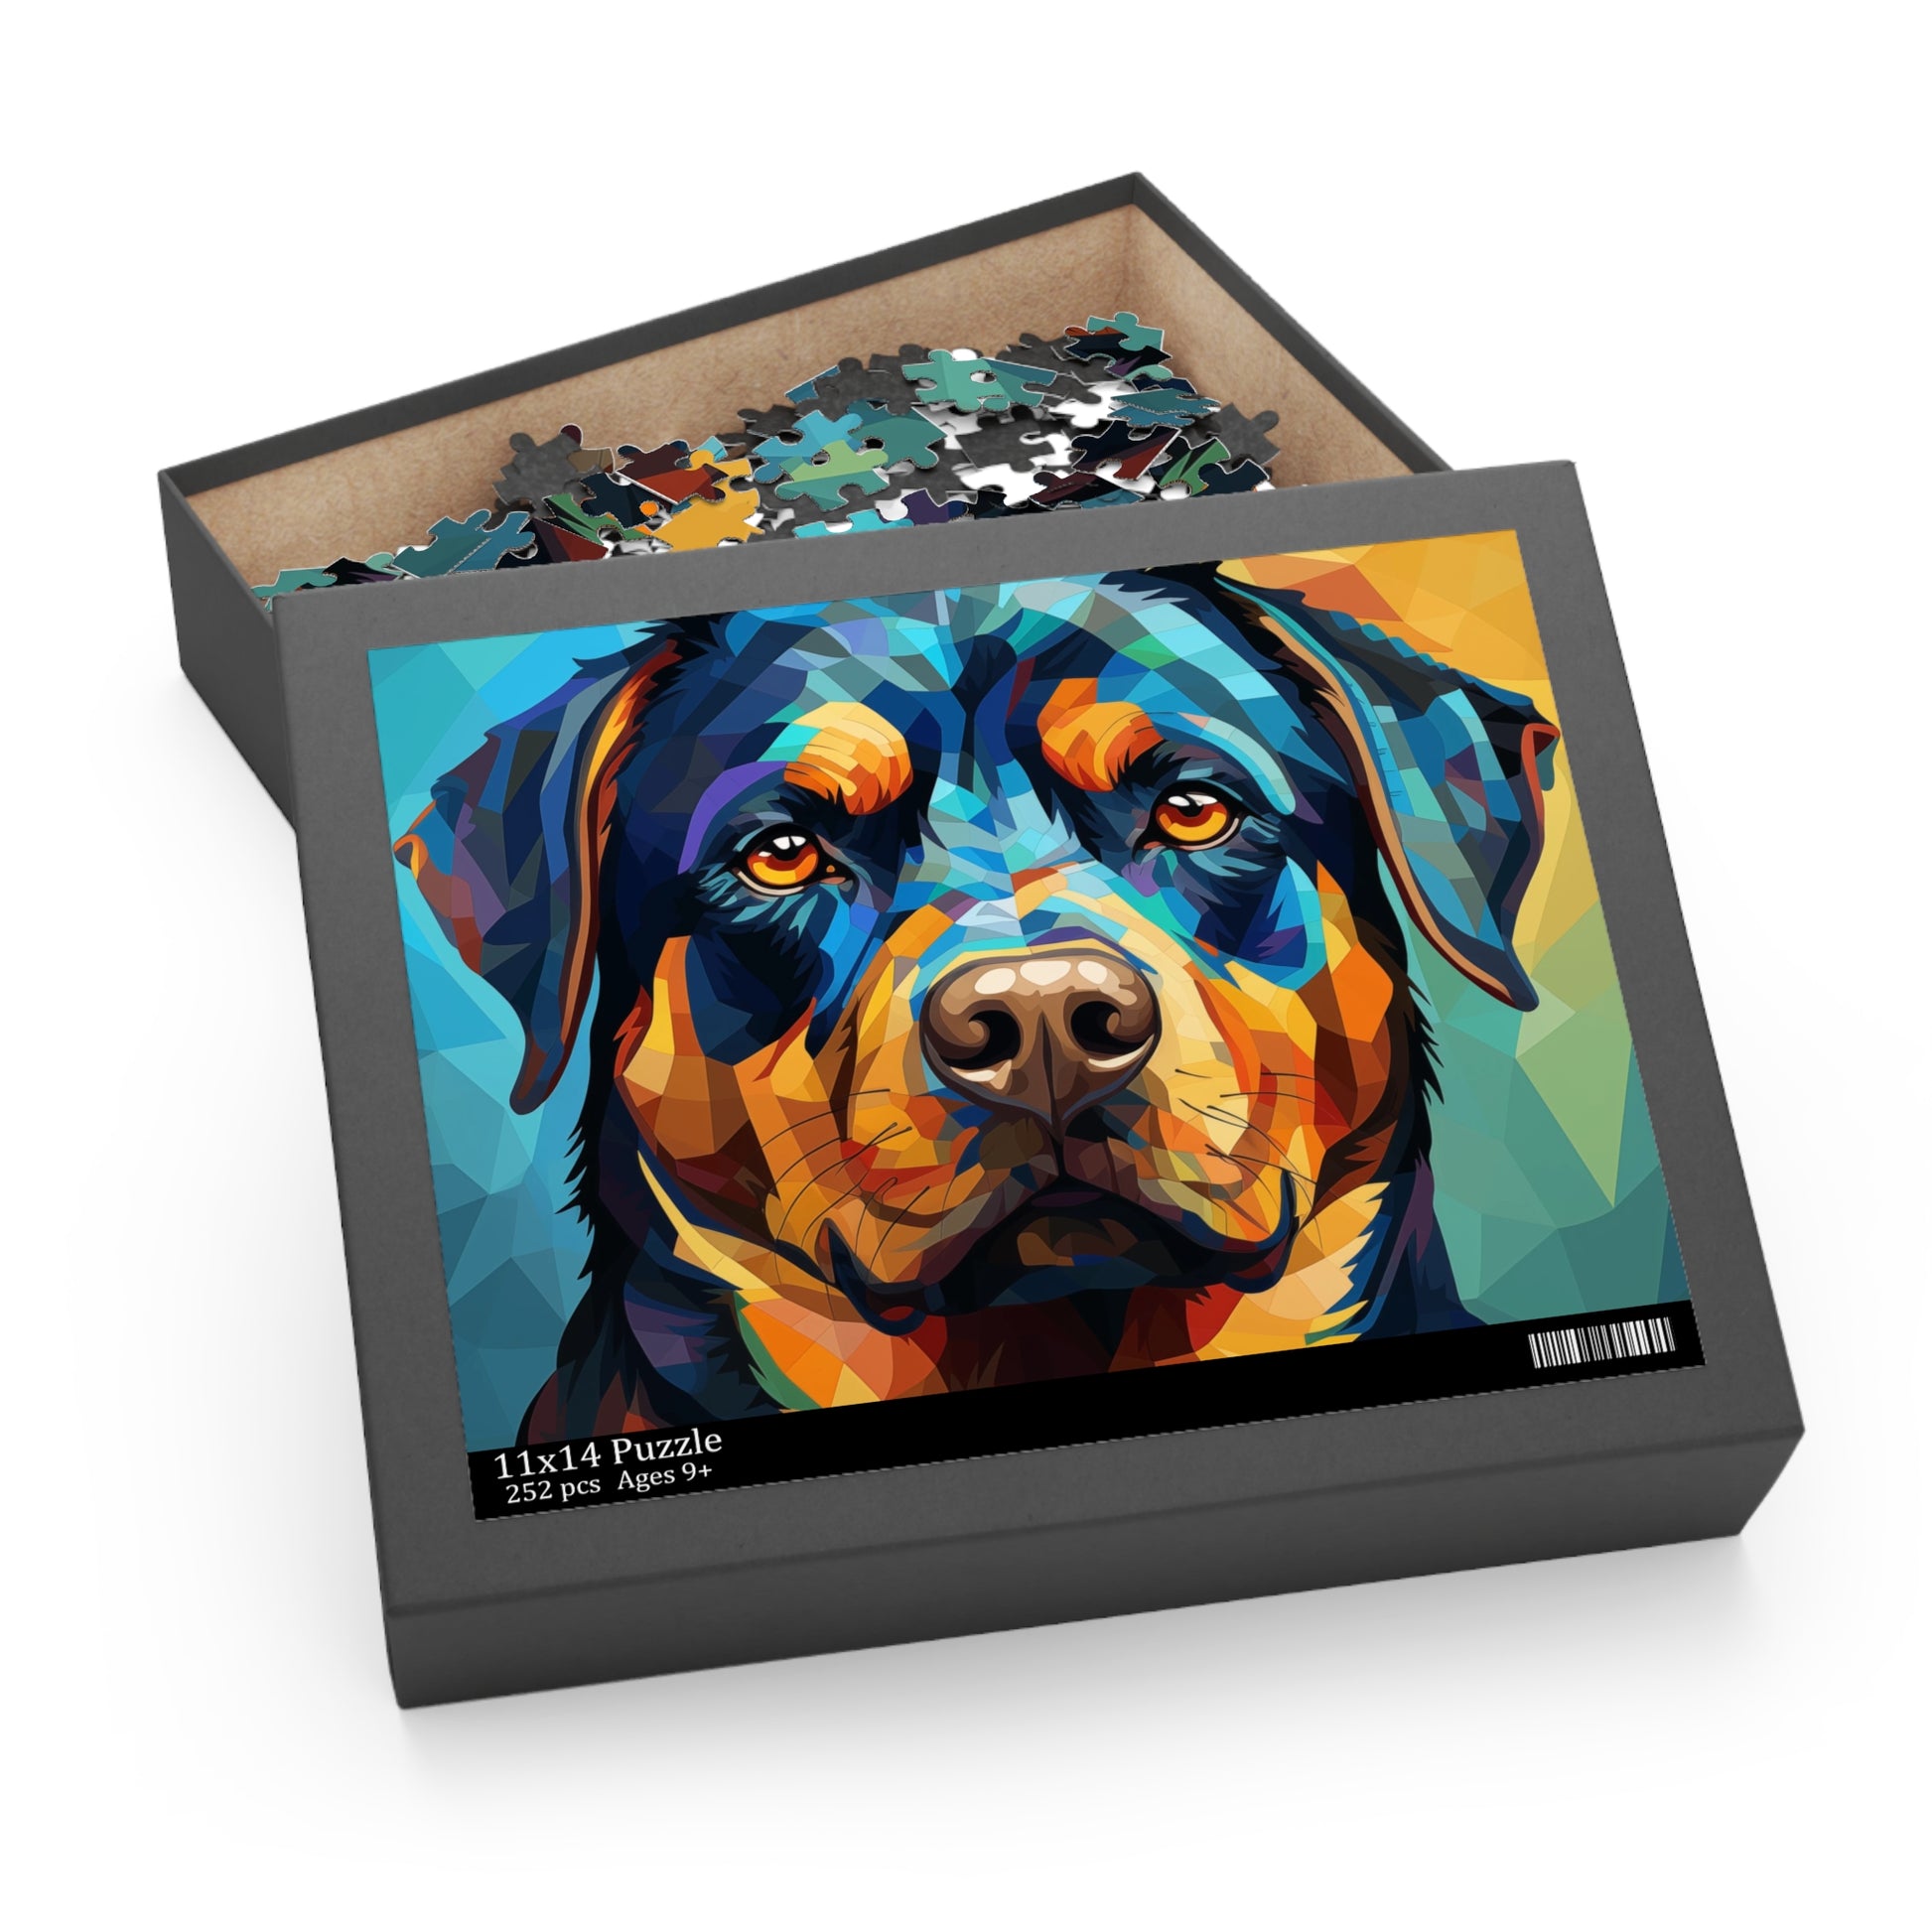 Watercolor Rottweiler Puzzle for Boys, Girls, Kids - Jigsaw Vibrant Oil Paint Dog Puzzle - Abstract Lover Gift - Rottweiler Trippy Puzzle Adult Birthday Business Jigsaw Puzzle Gift for Him Funny Humorous Indoor Outdoor Game Gift For Her Online-8